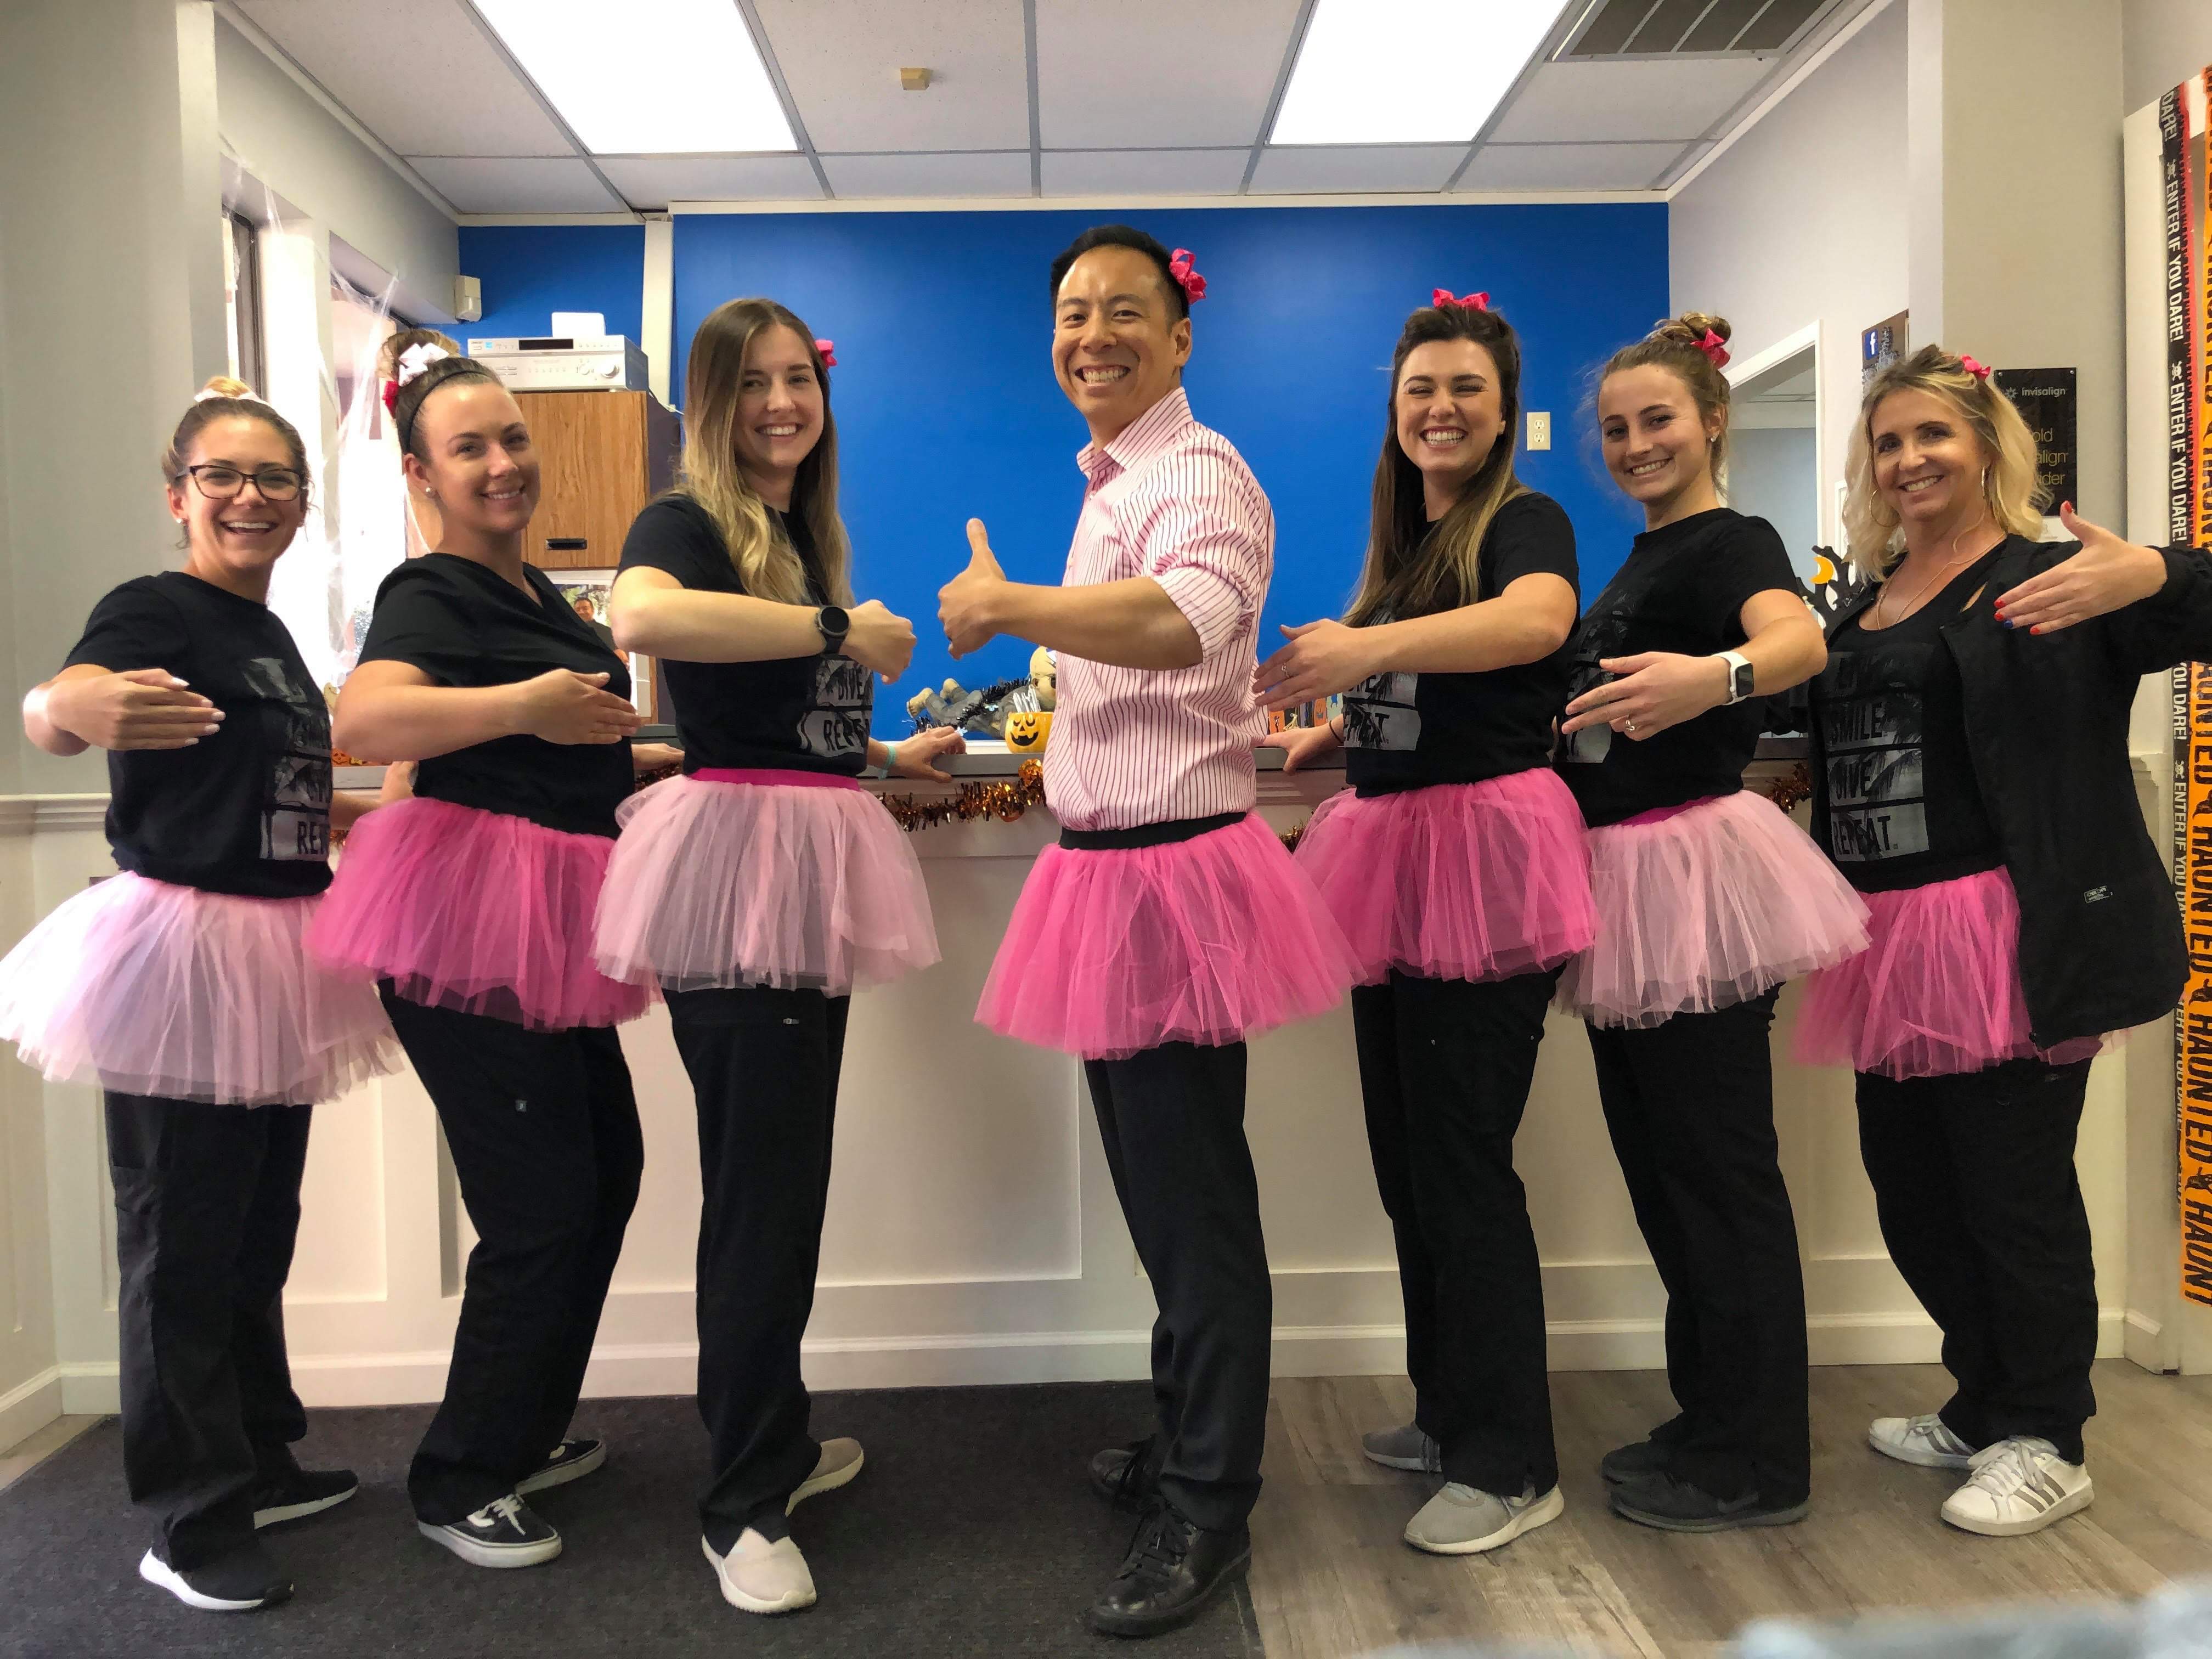 Dr. Jeff and team in pink tutus for Breast Cancer Awareness Month